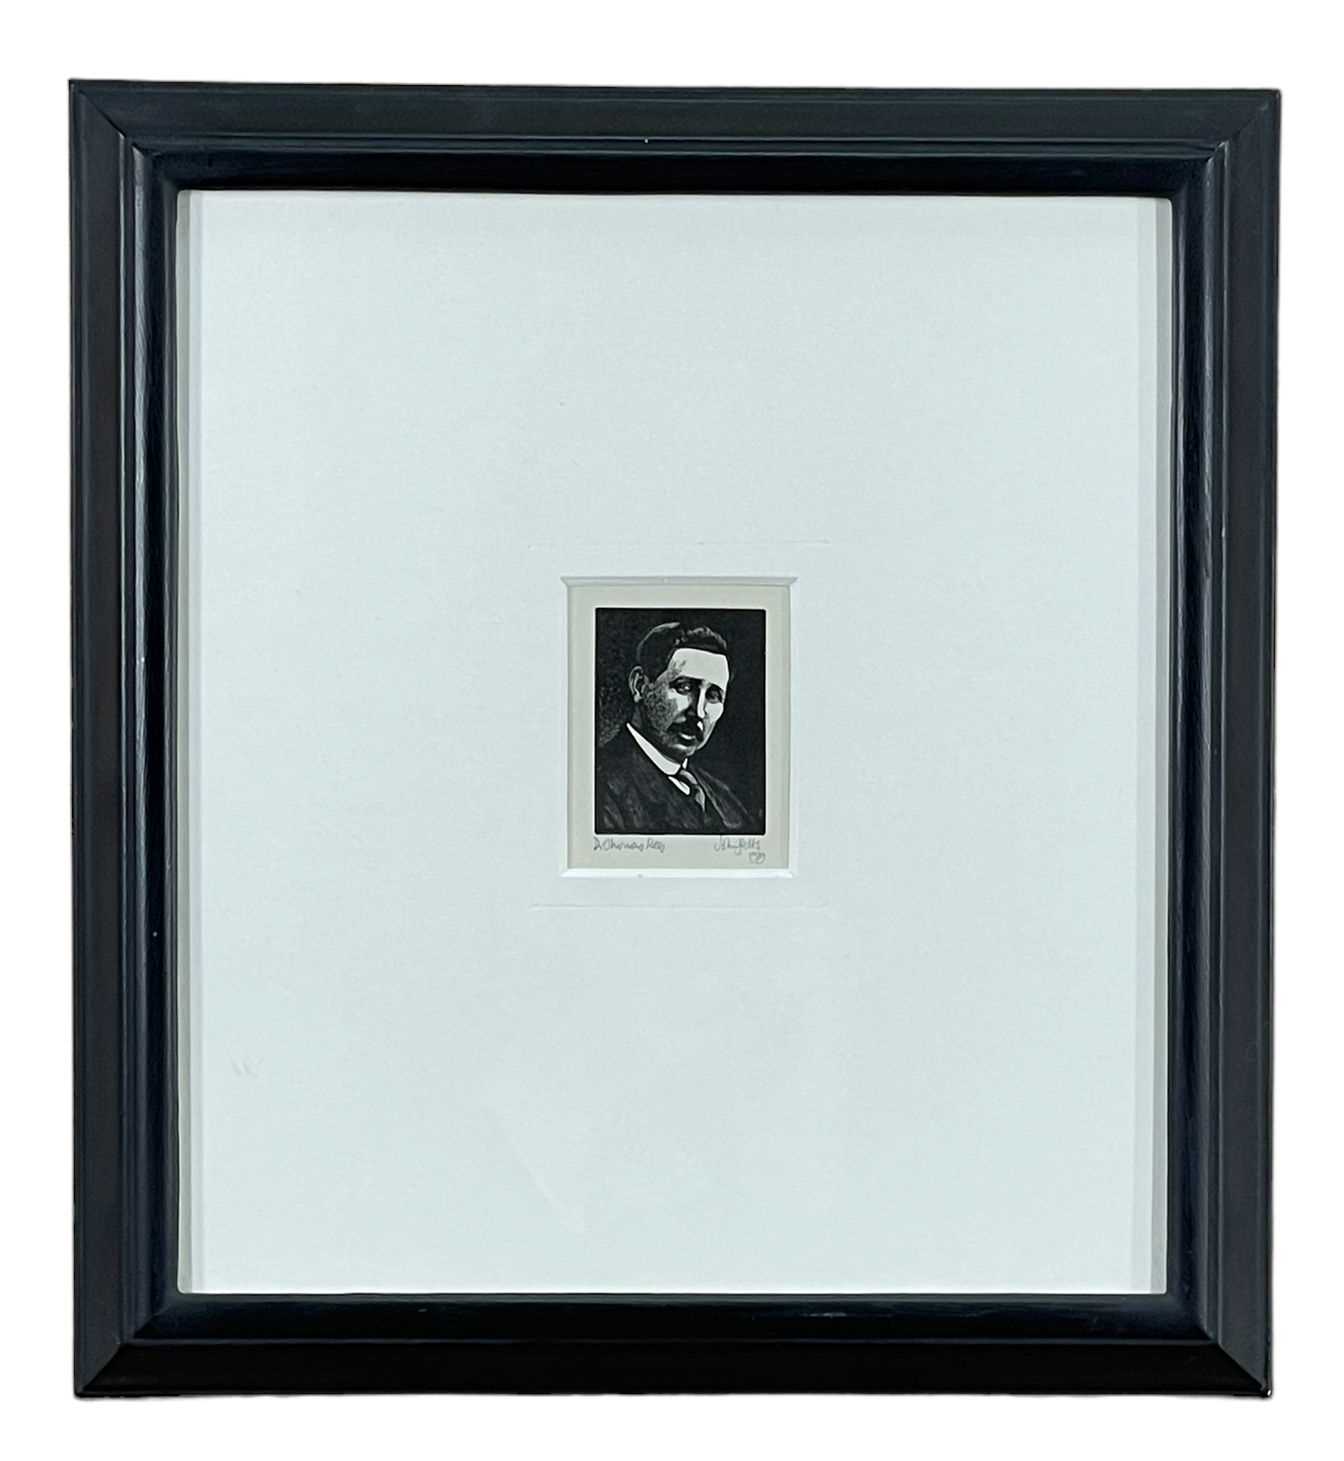 ‡ JOHN PETTS wood engraving - portrait of Doctor Thomas Rees, signature and title to margin and - Image 2 of 2